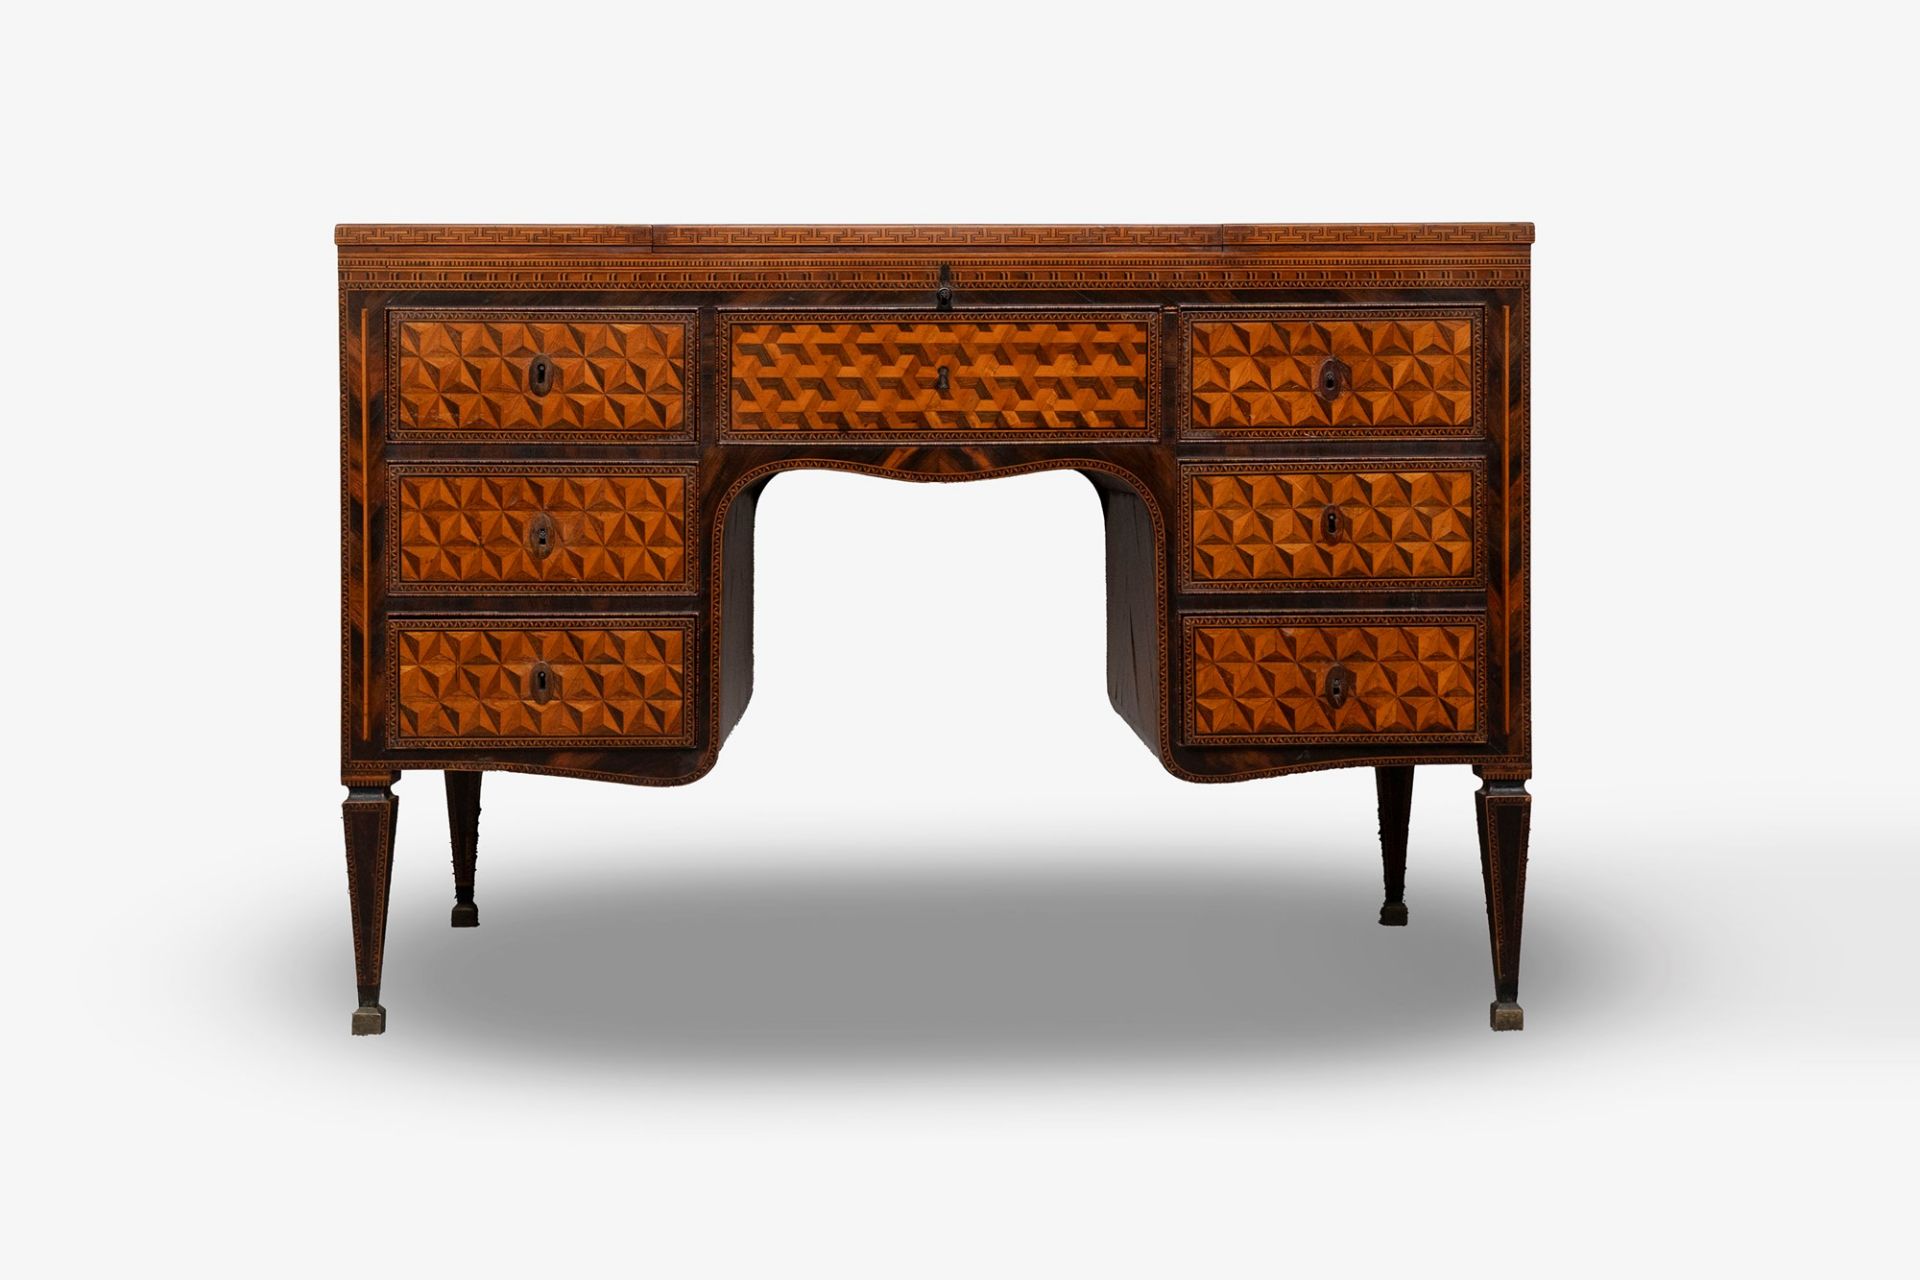 Exceptional Louis XVI center desk inlaid in various essences with geometric motifs, Northern Italy,